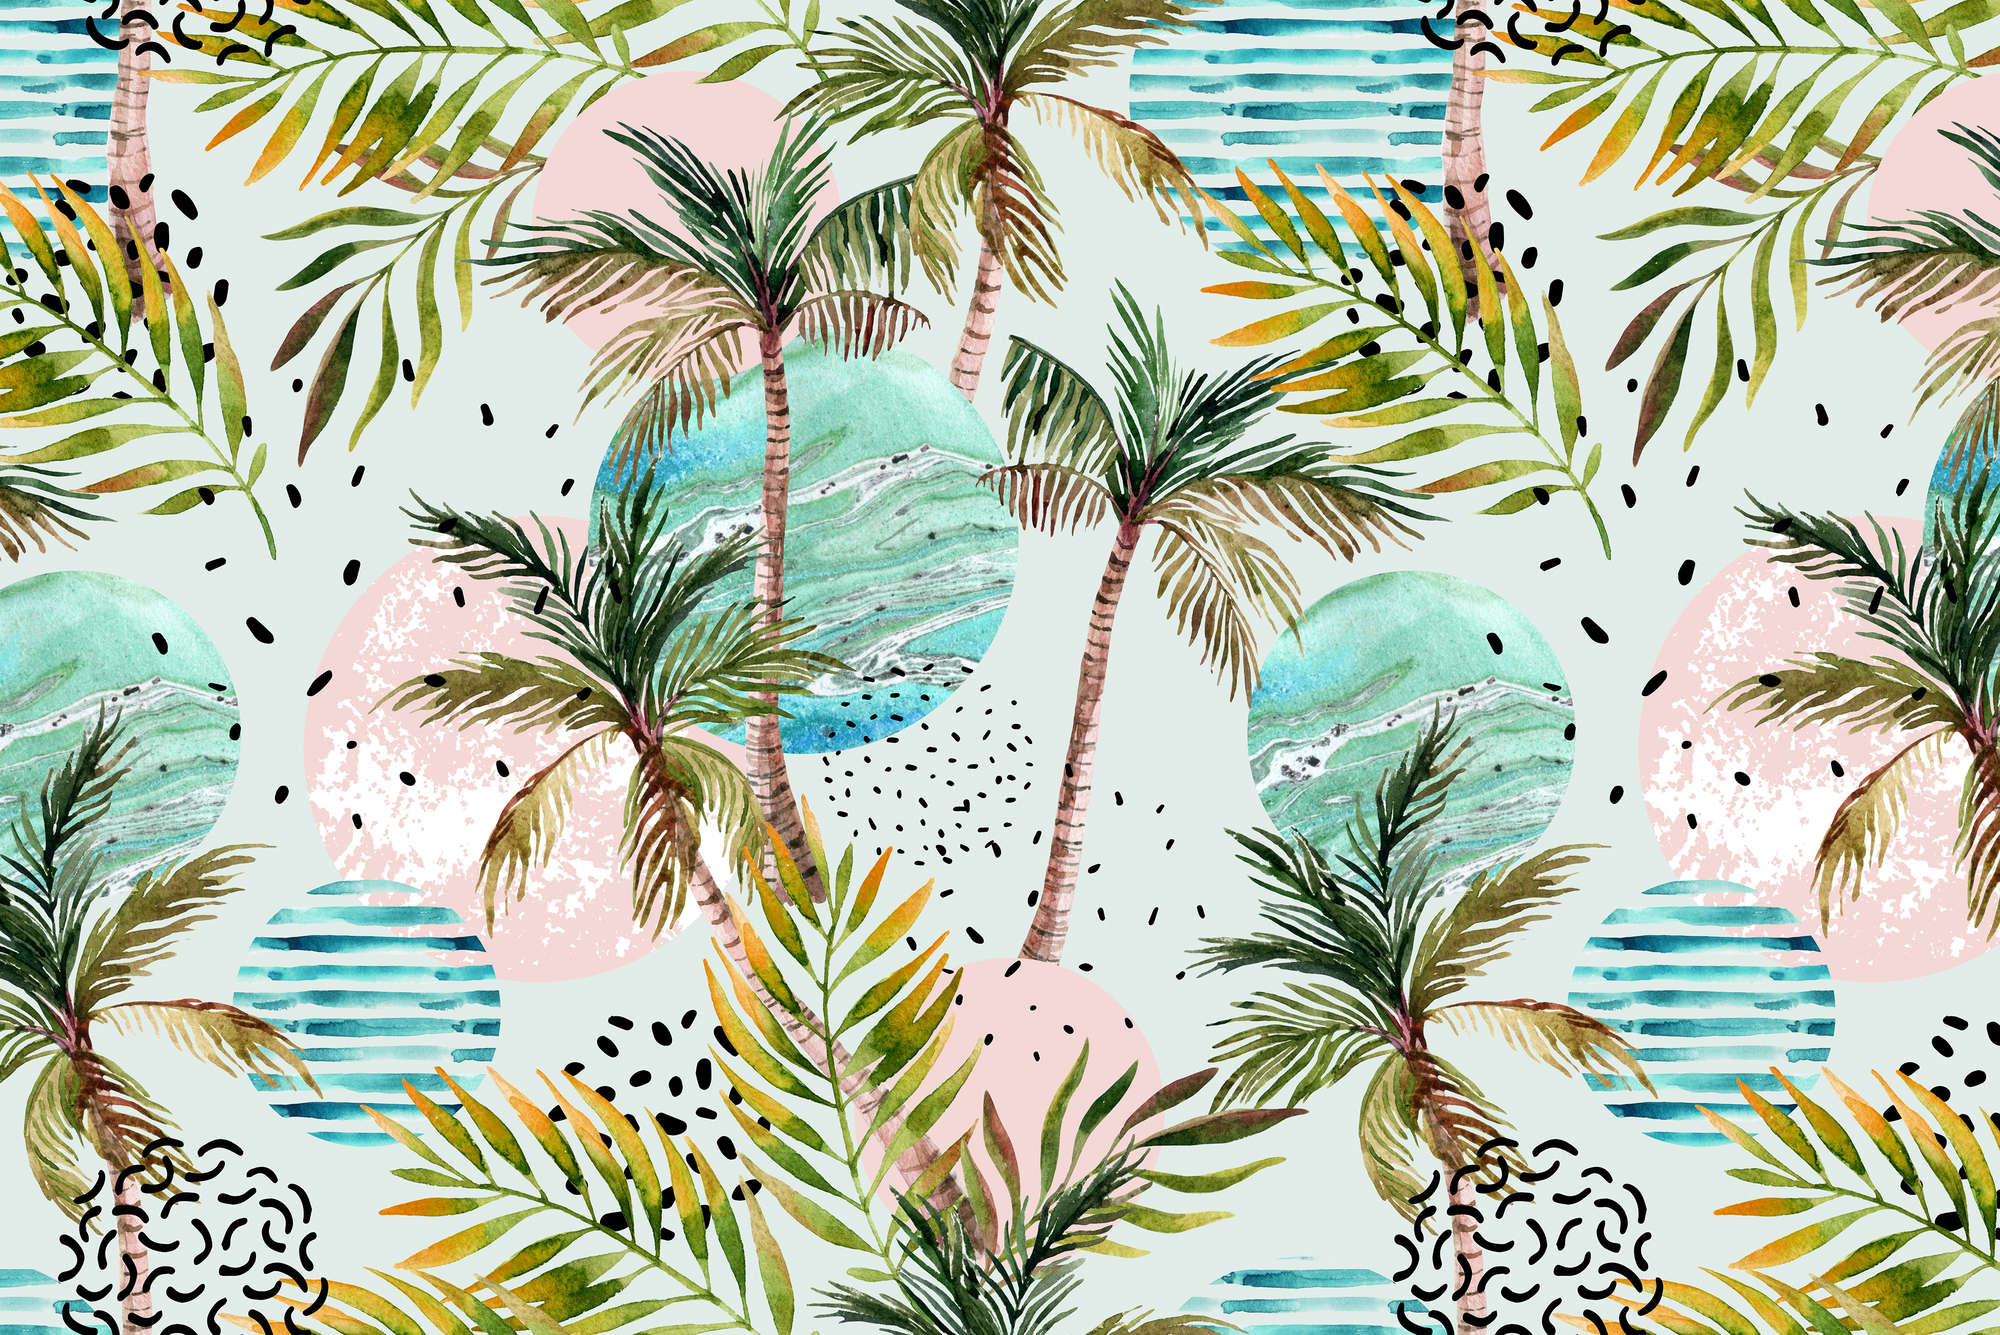             Graphic mural palm trees with waves symbols on textured non-woven
        